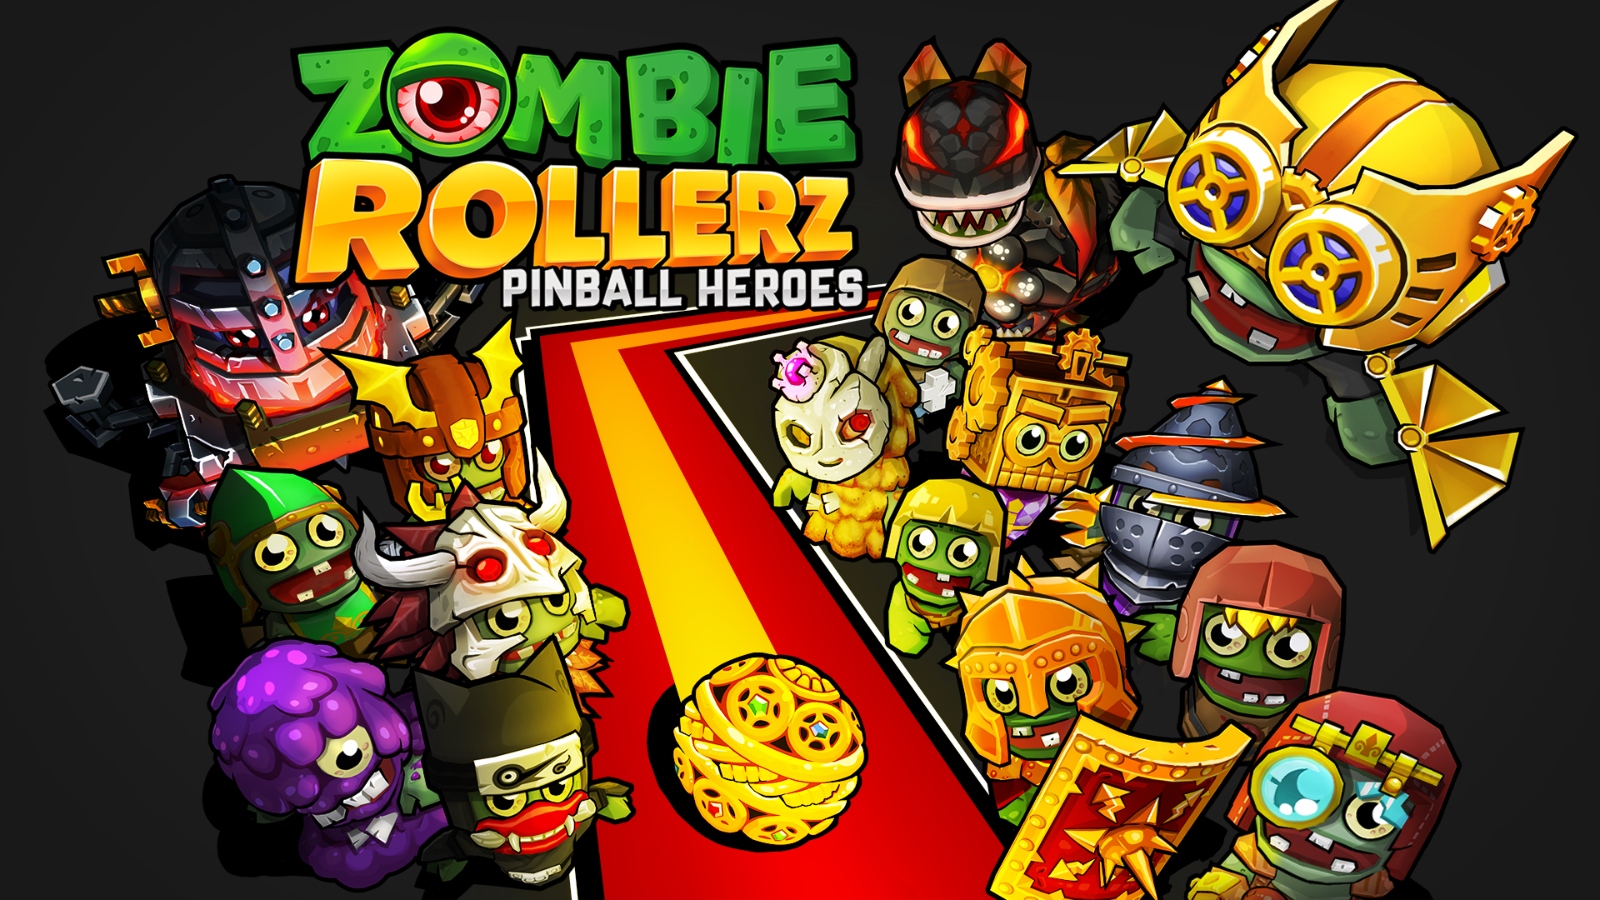 Zing Games Announces Tower Defence Game Zombie Rollerz: Pinball Heroes